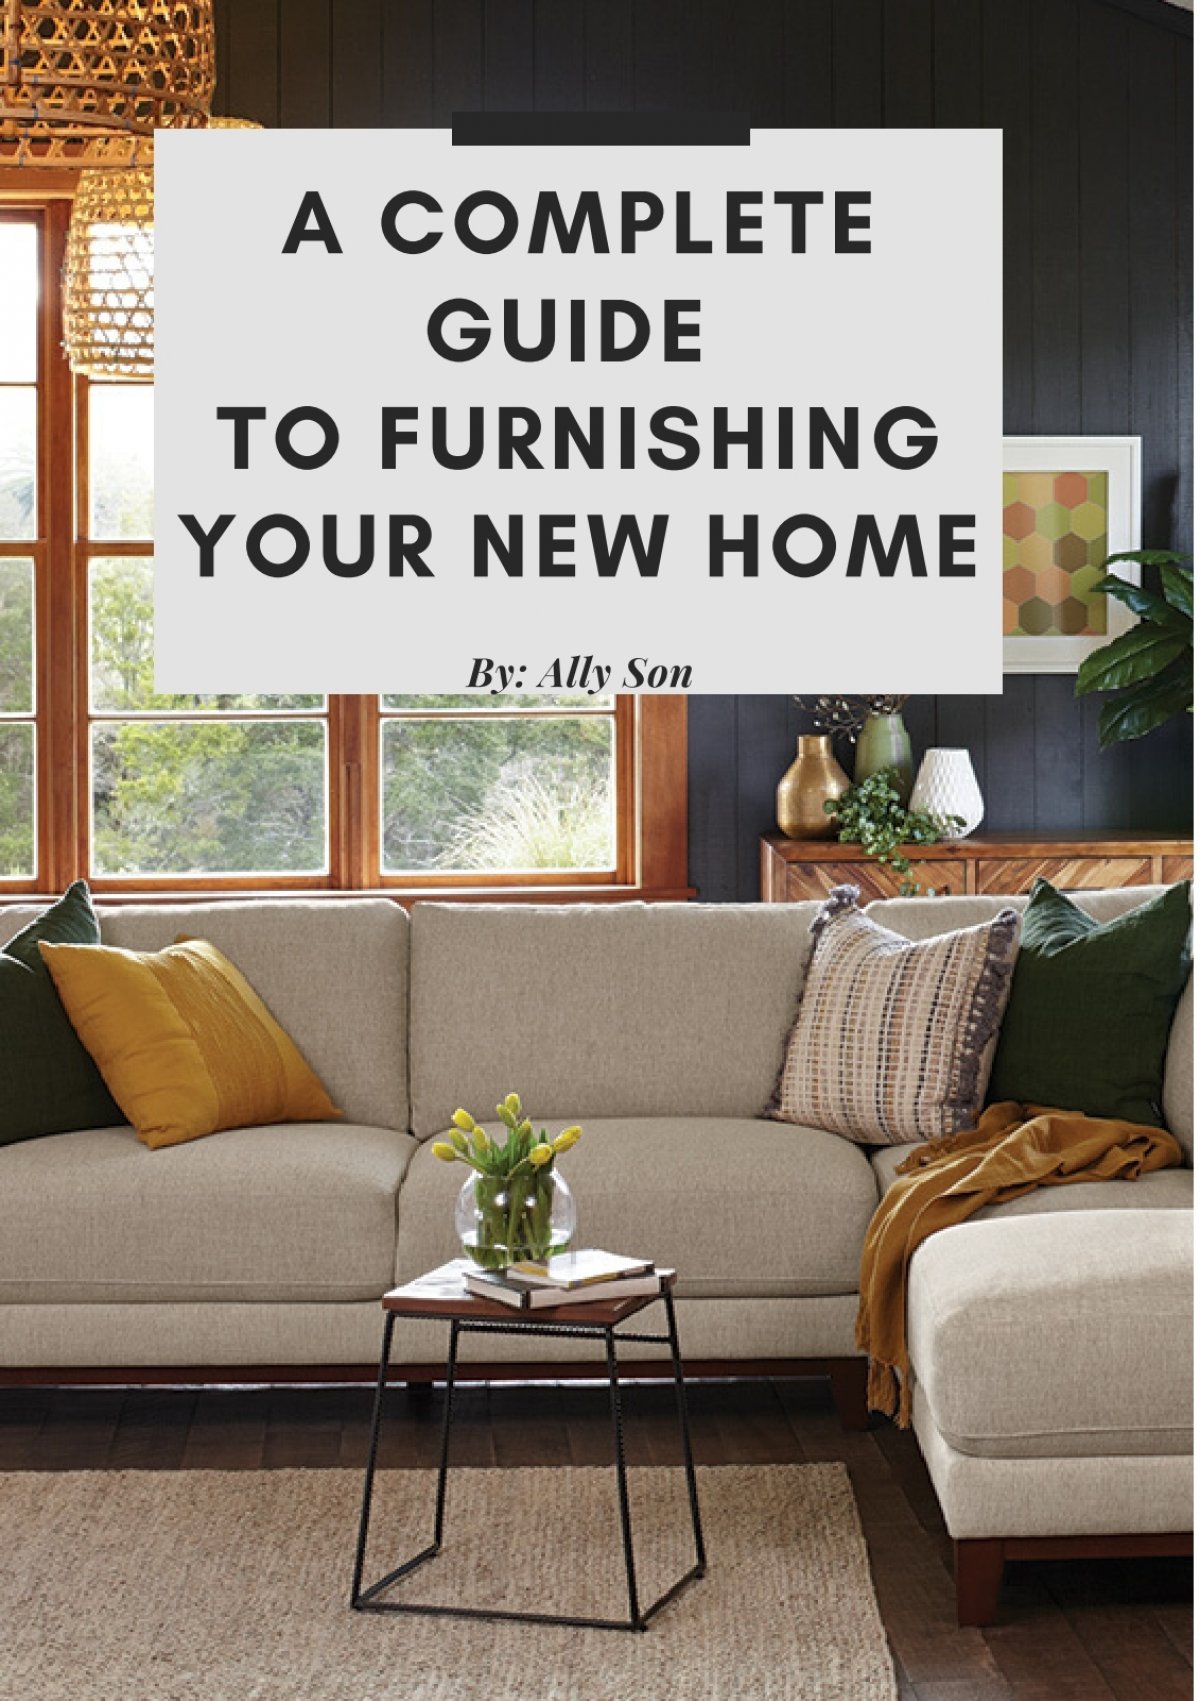 A Complete Guide to Furnishing your New Home